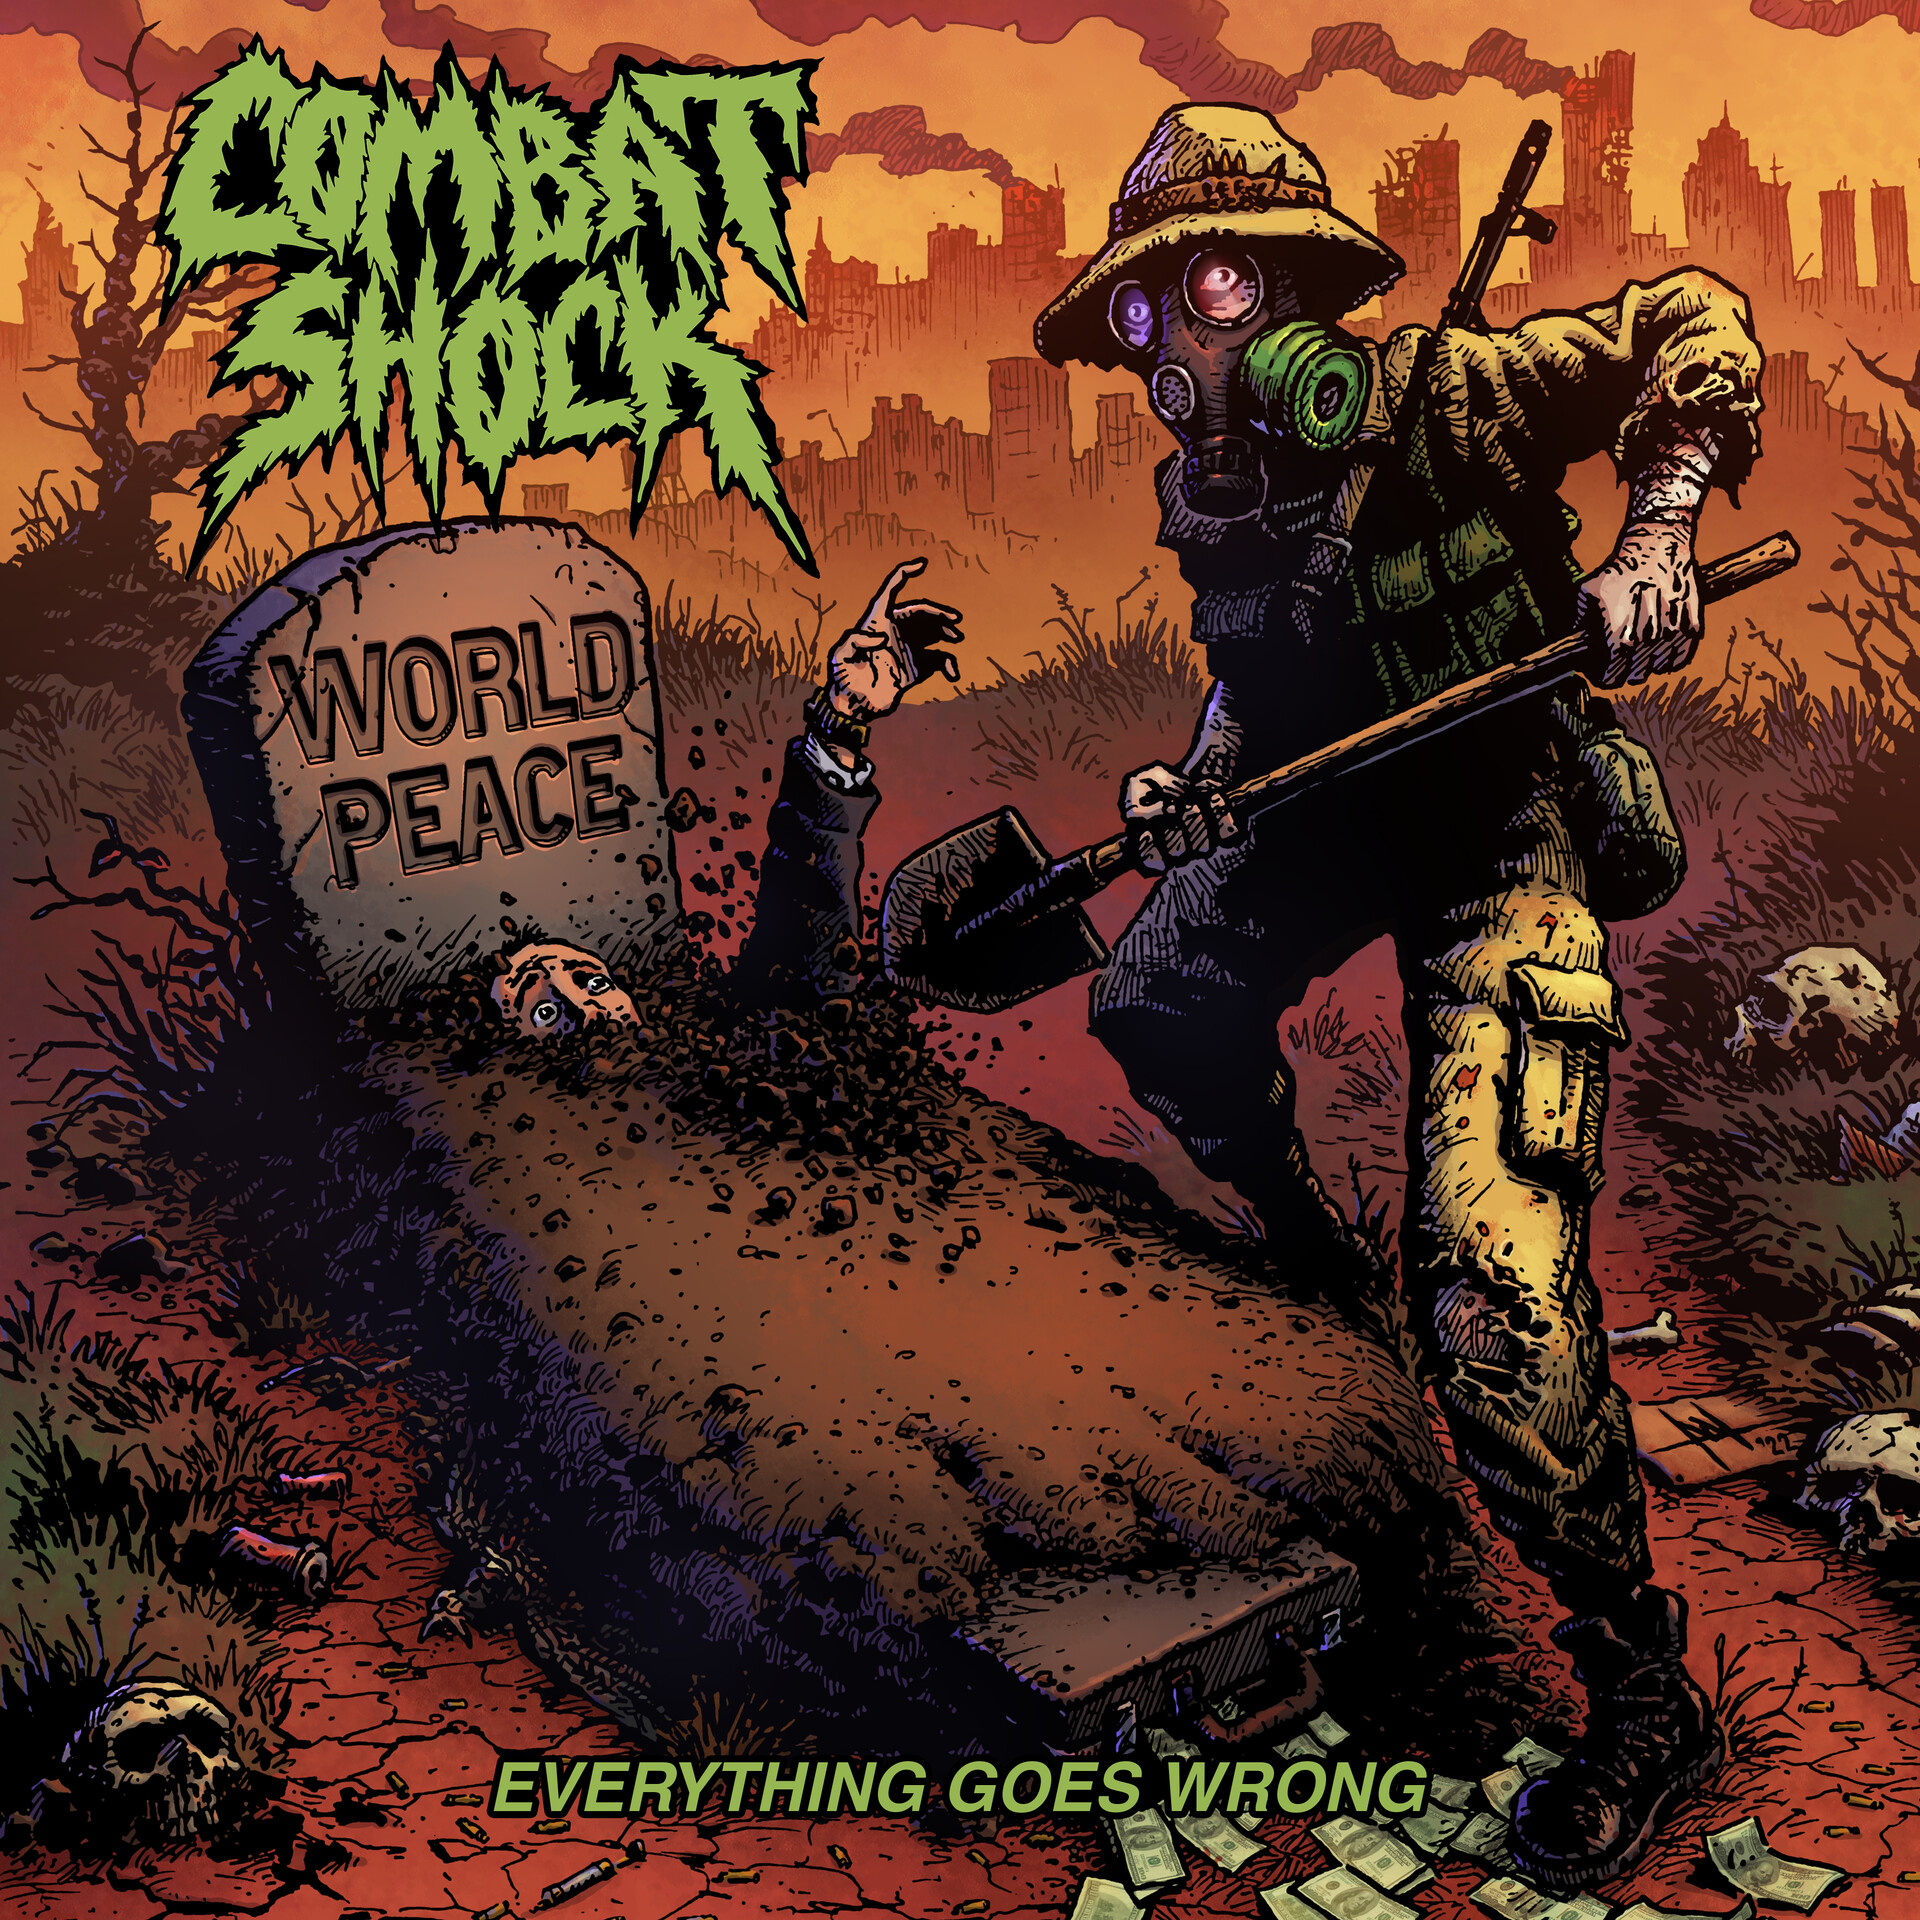 Combat shock. Everything goes wrong.